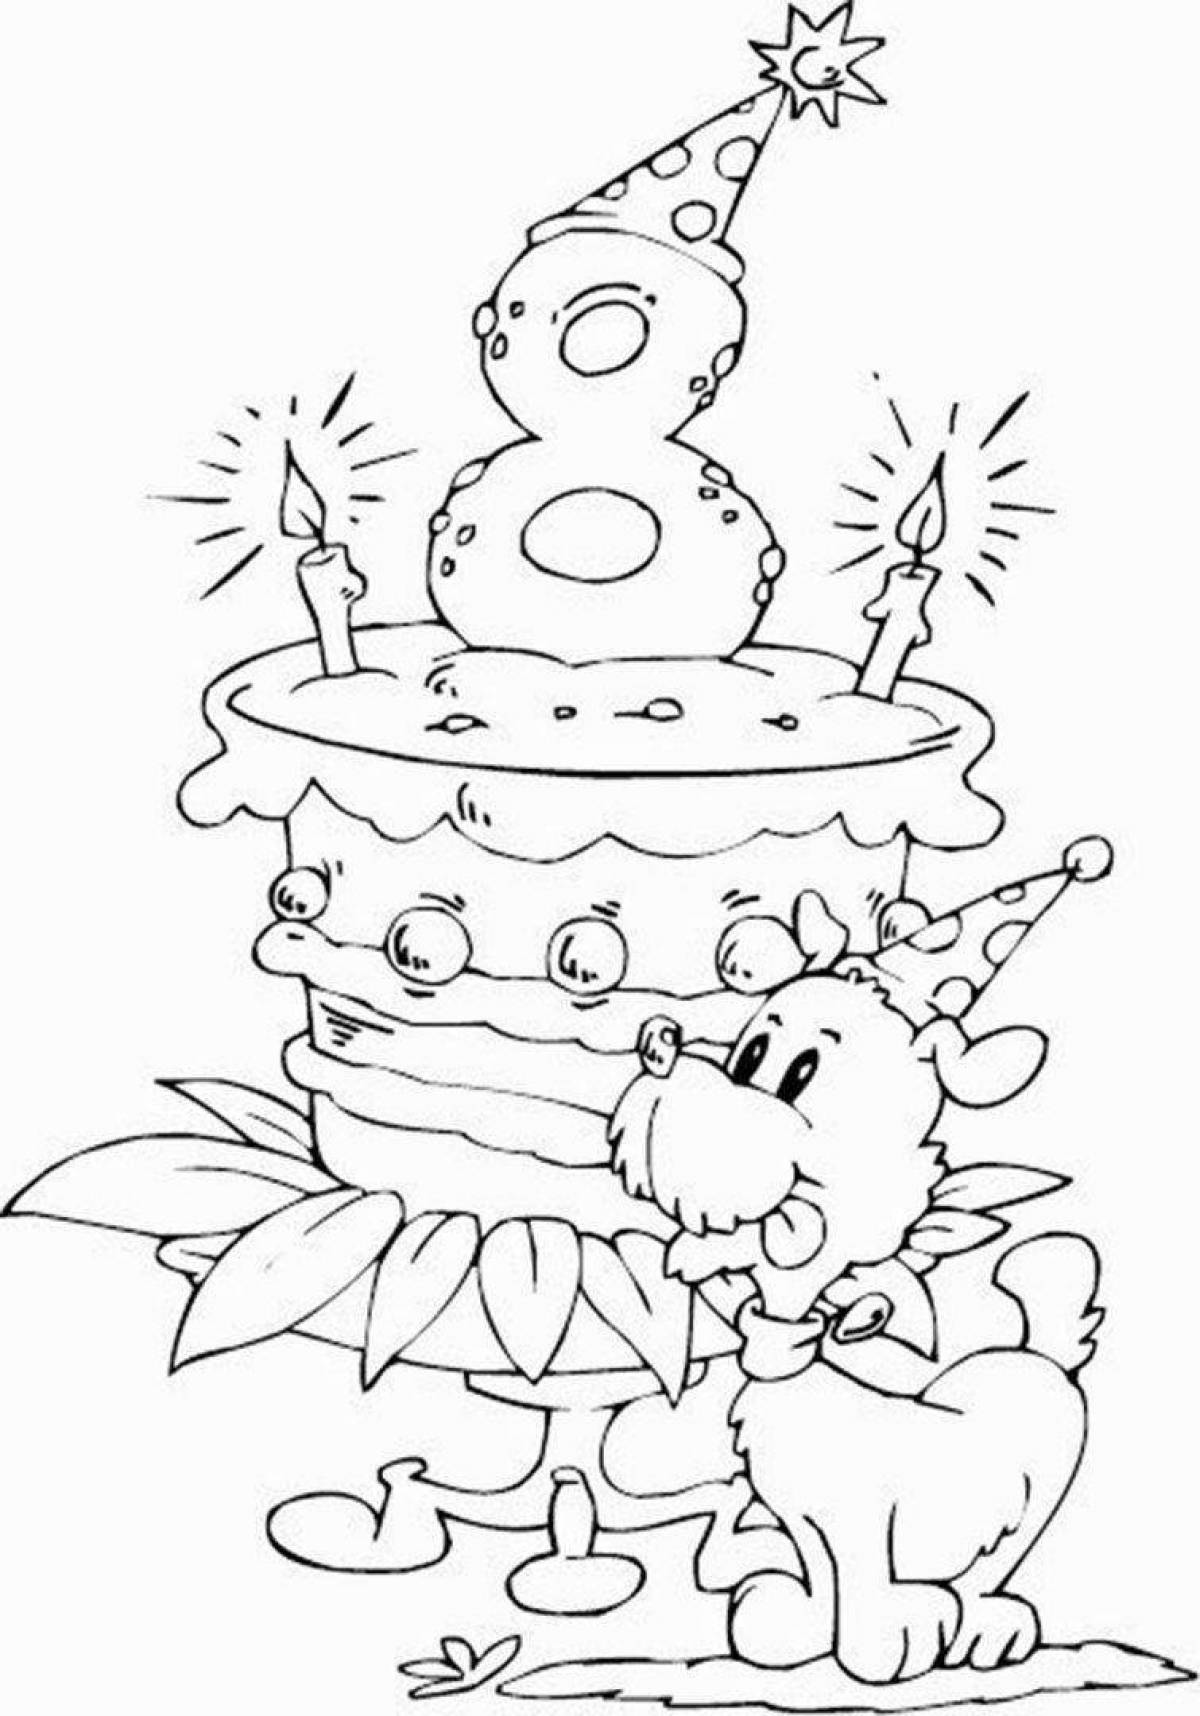 Colorful happy birthday coloring page for girl